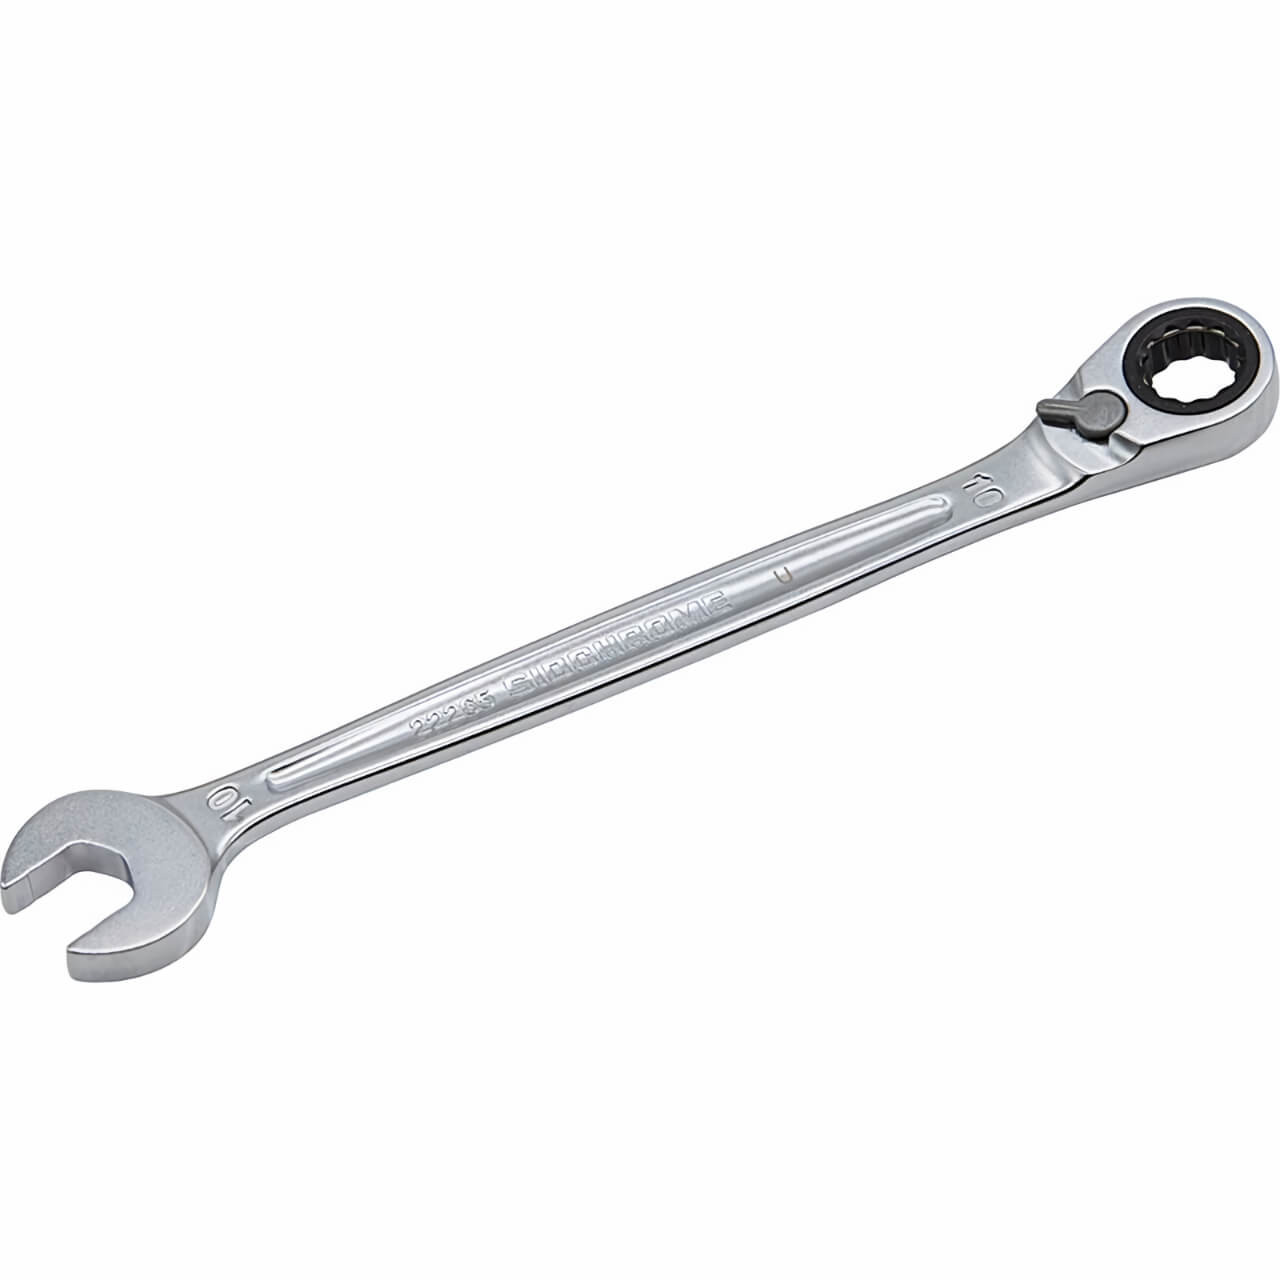 Sidchrome 15mm 467 Pro Series Reversible Combination Geared Spanner Metric